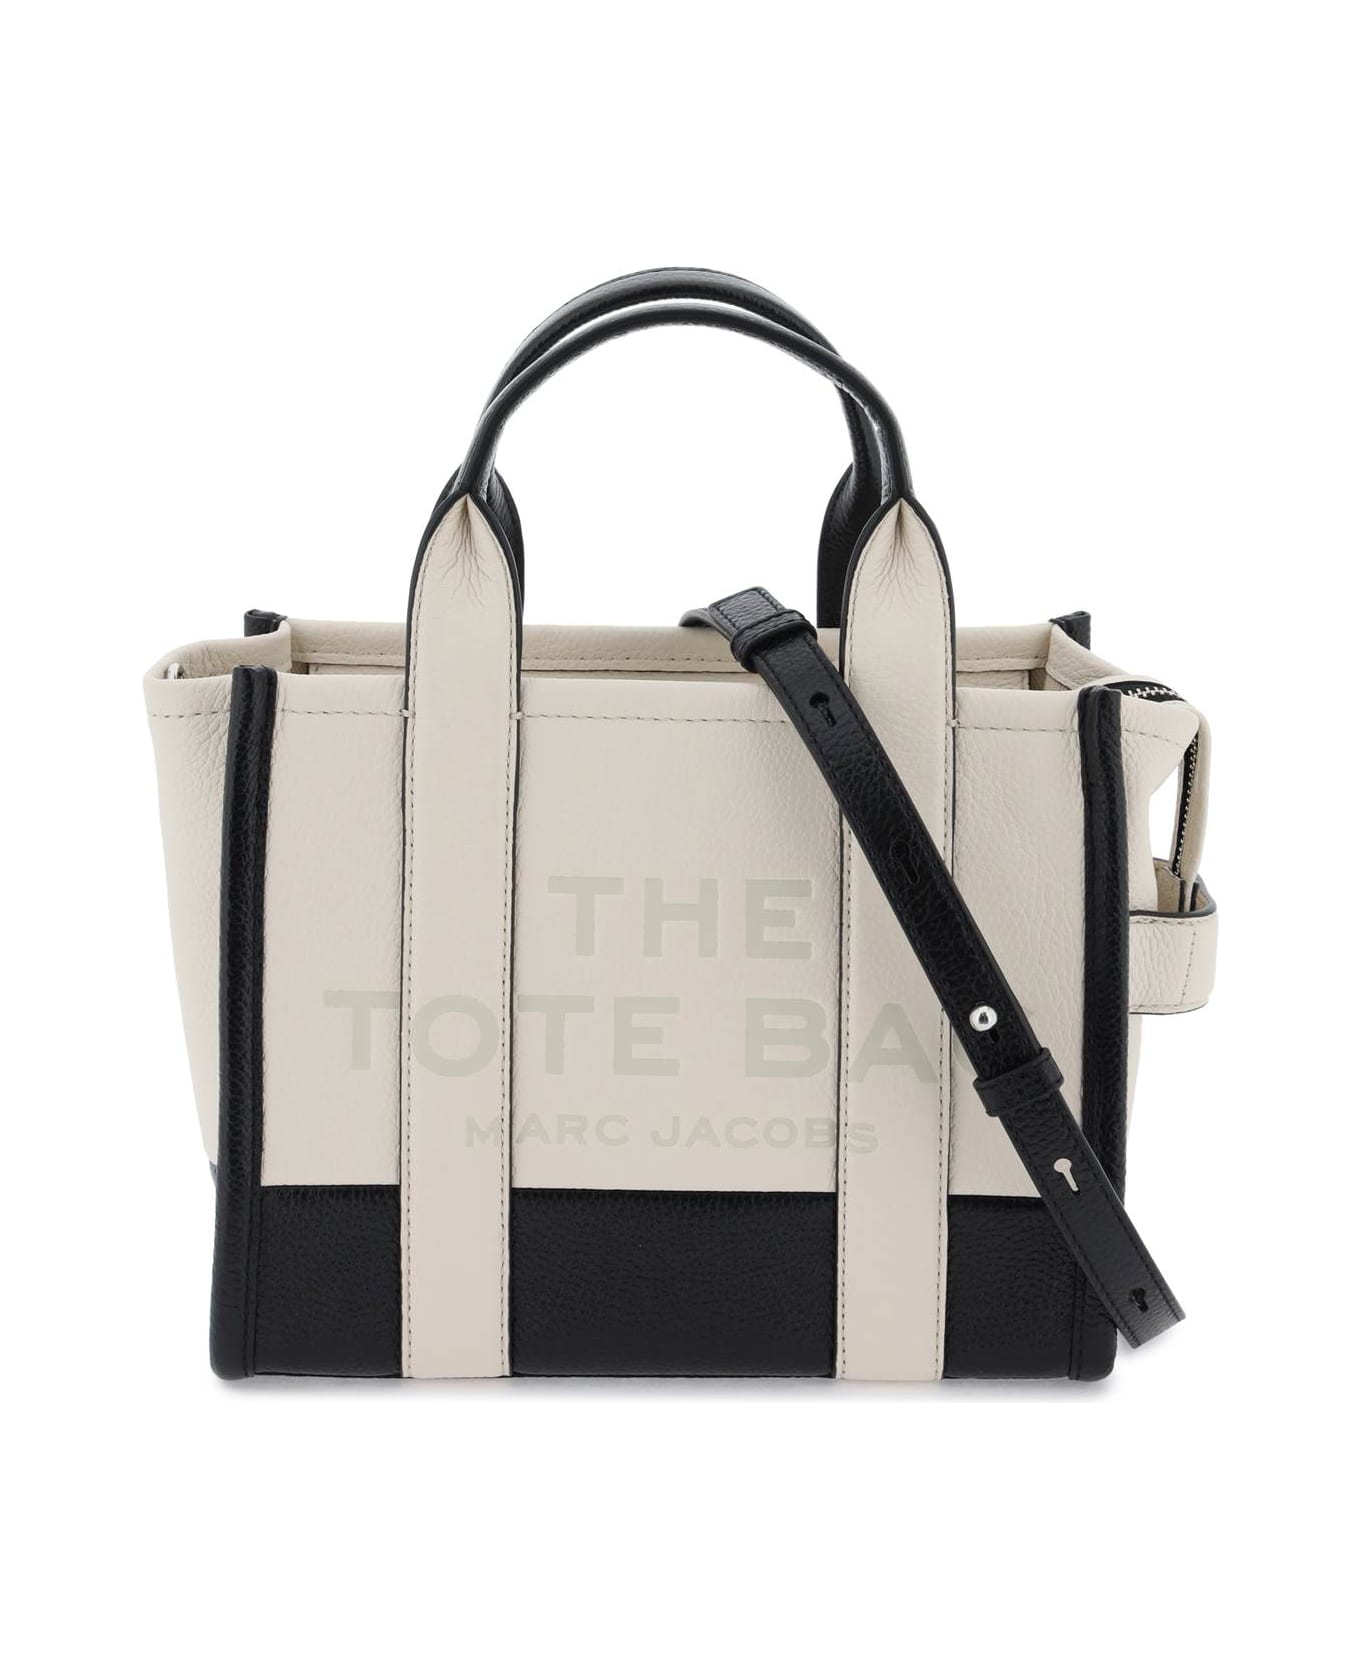 Marc Jacobs The Small Tote Bag - Cream